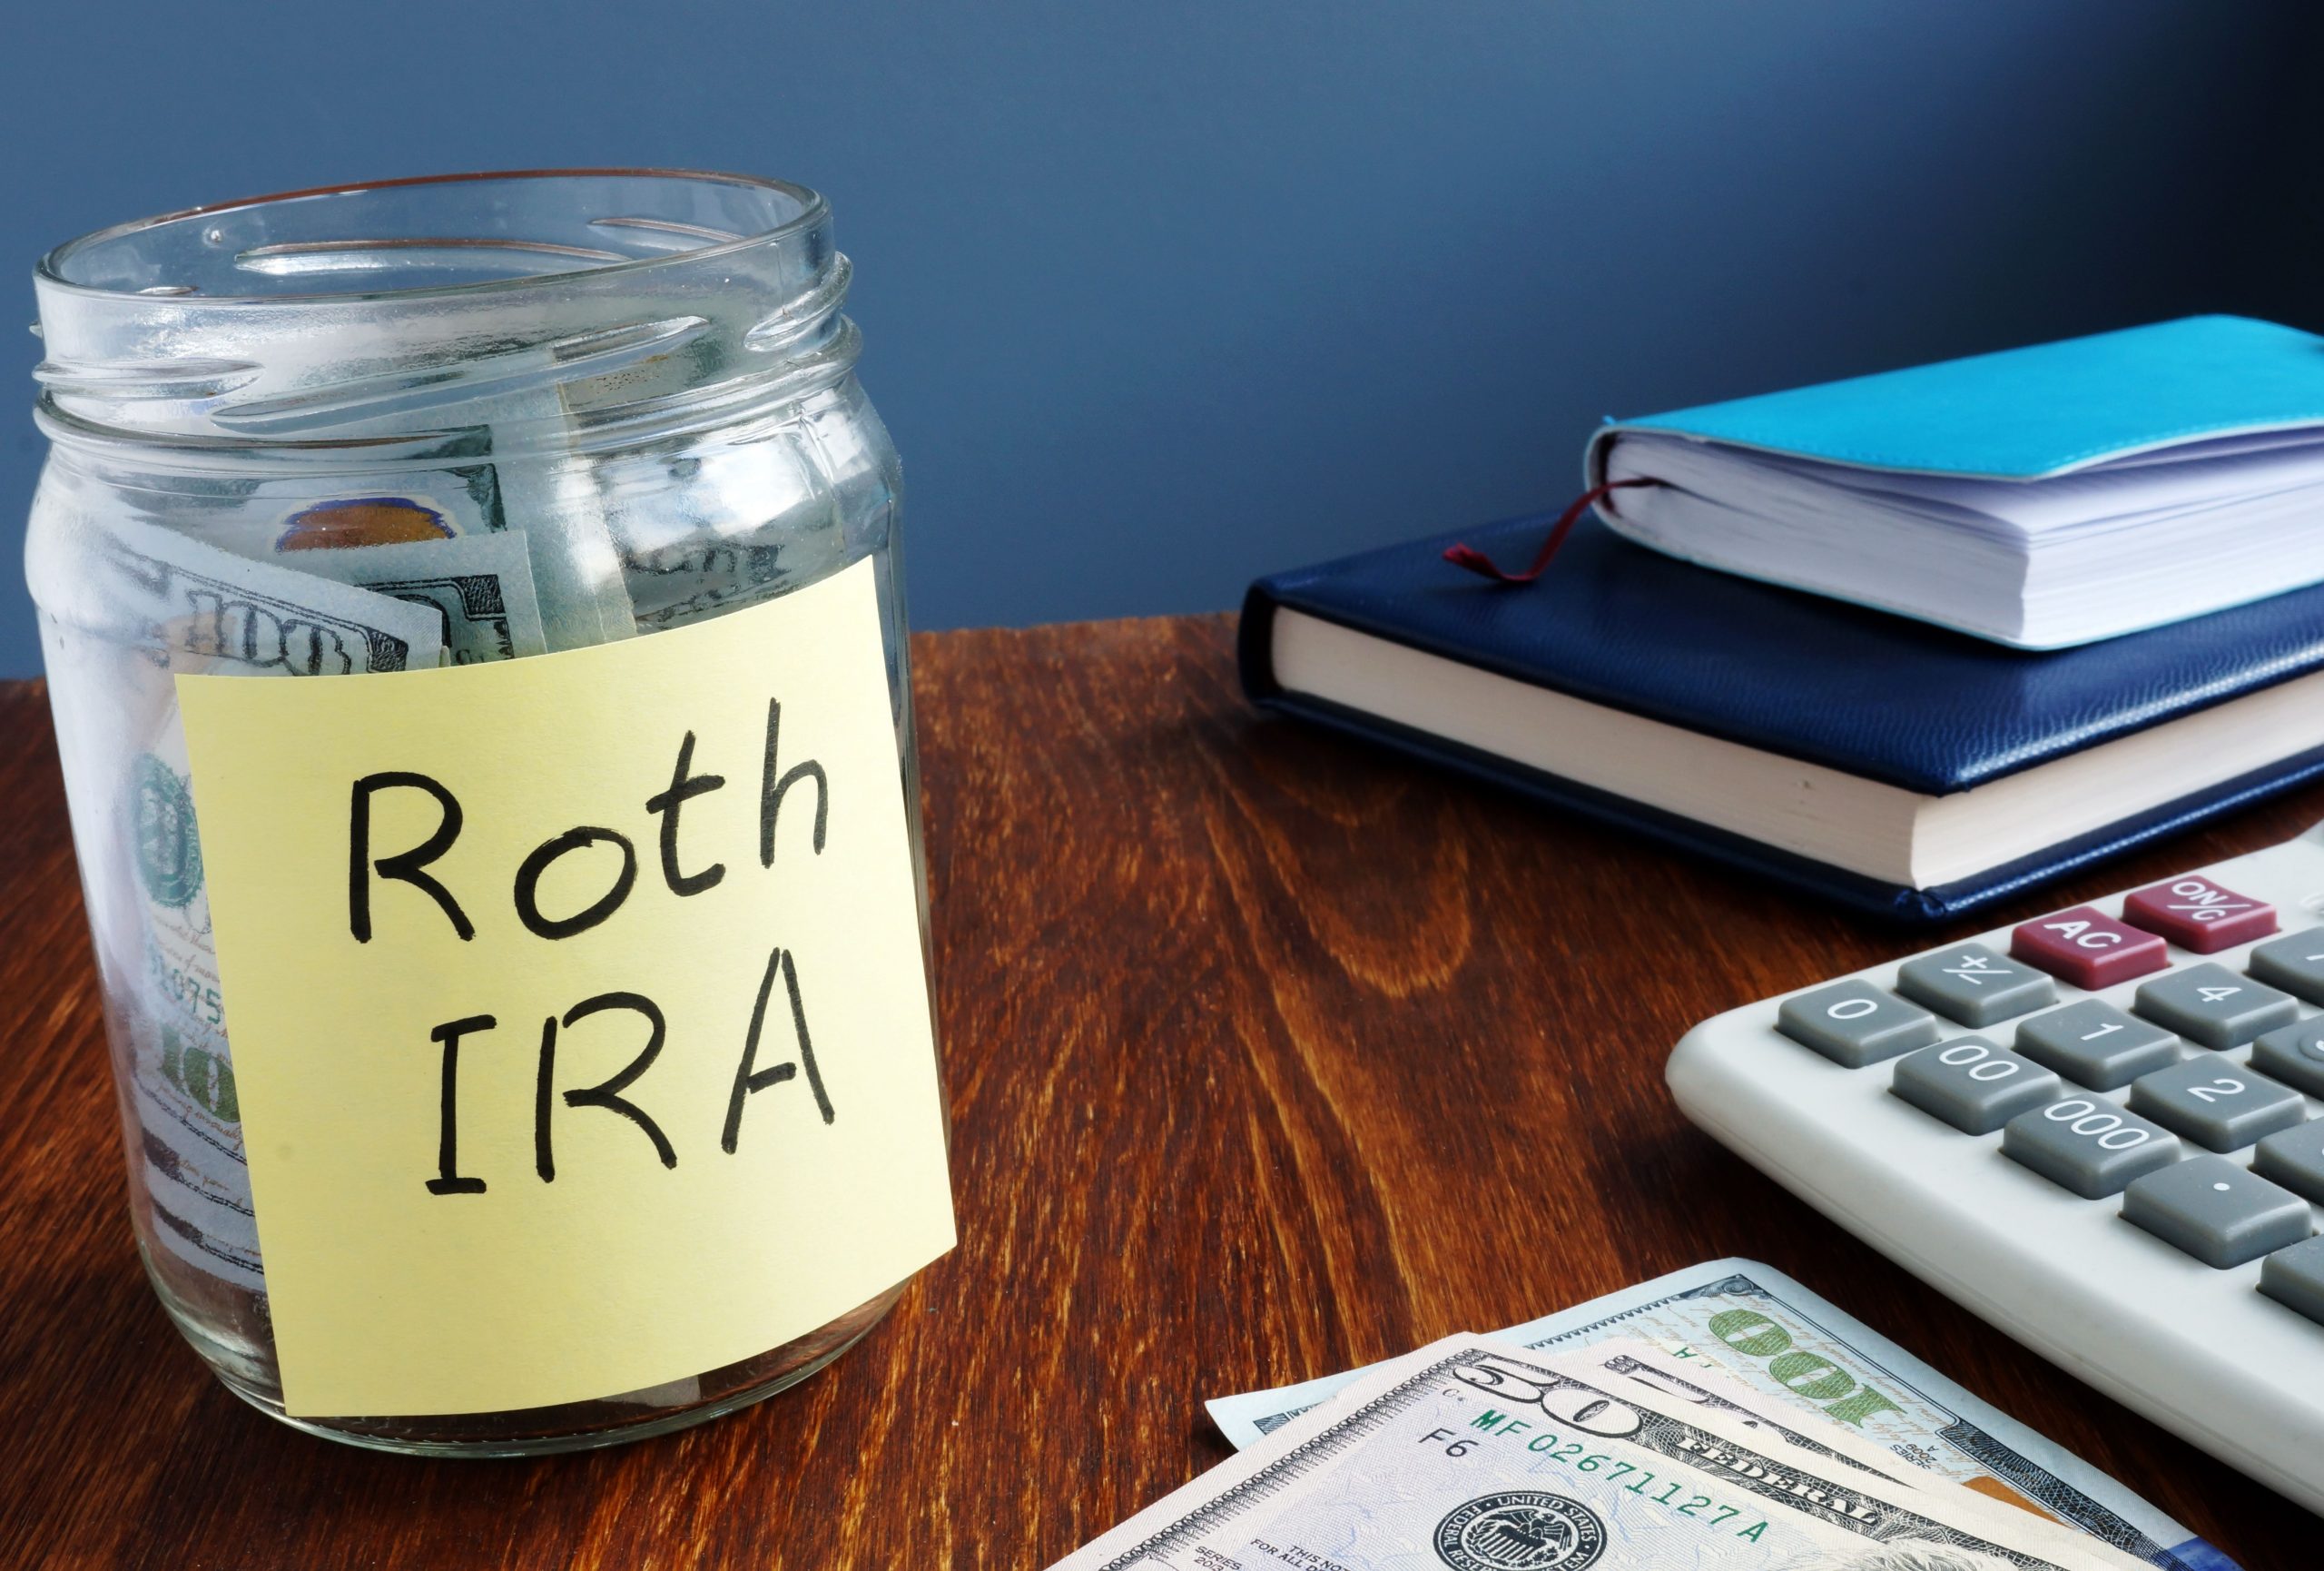 Roth IRA: What Is It?